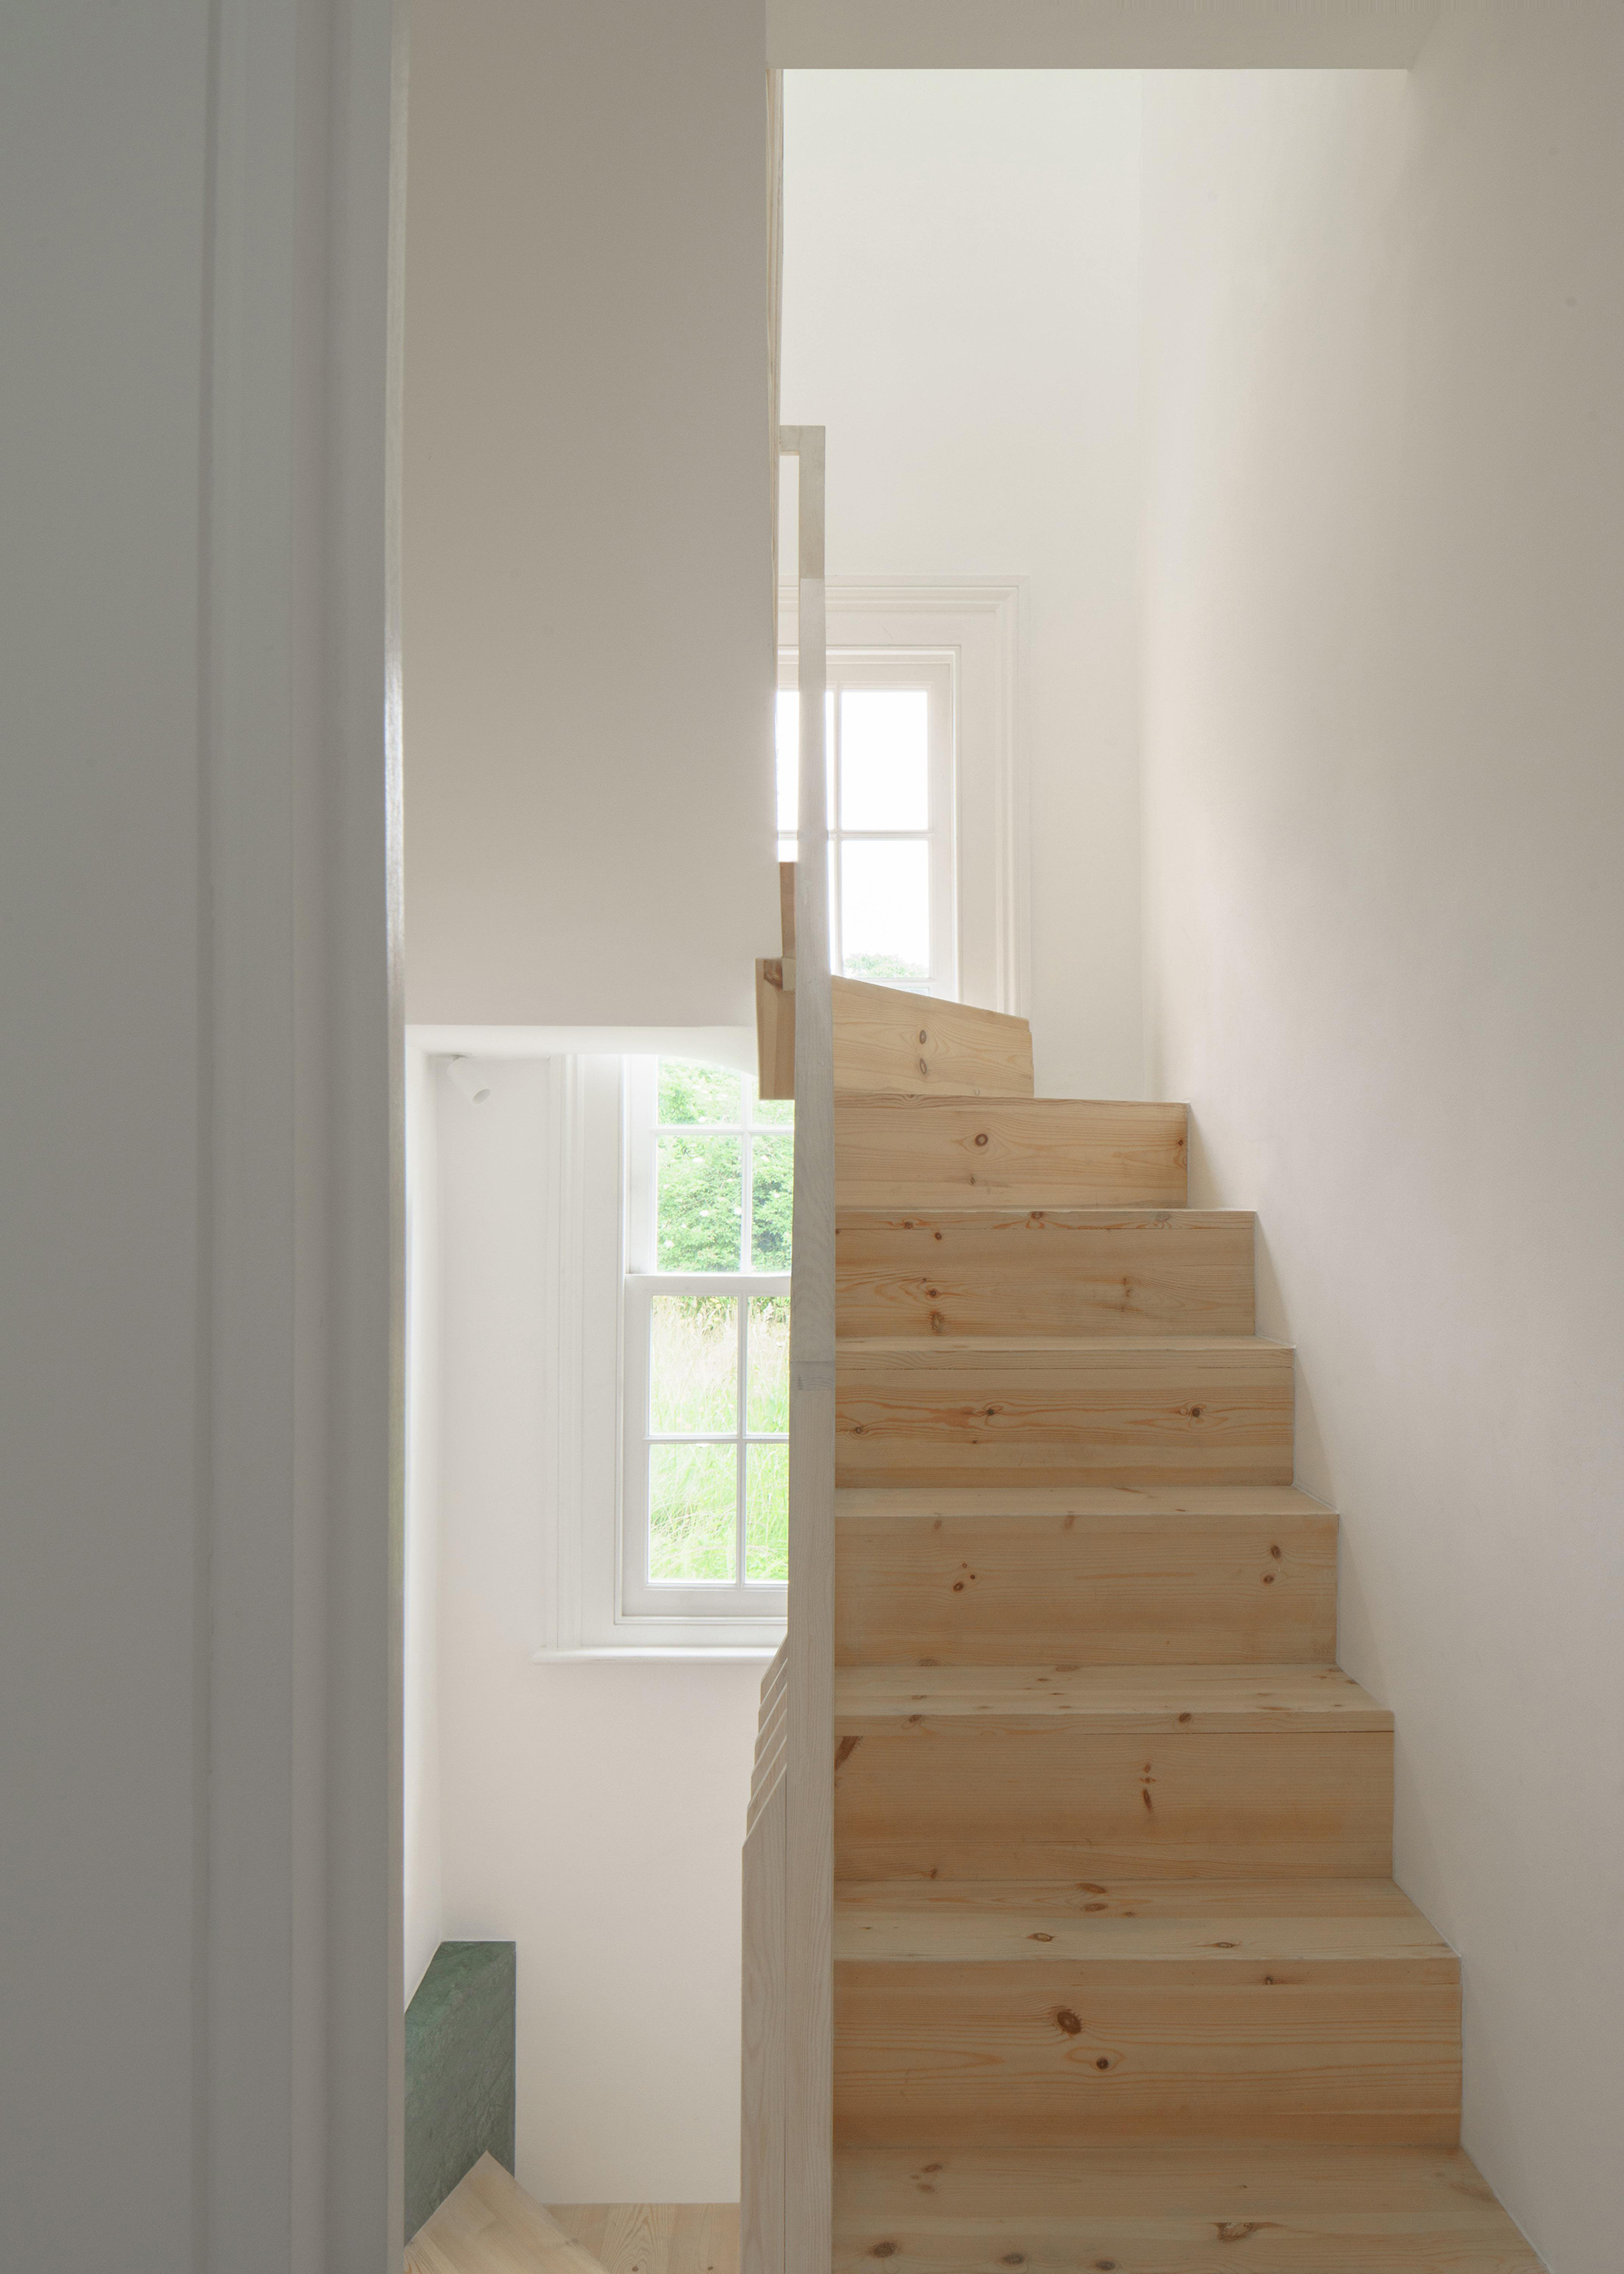 London townhouse renovation, wood staircase